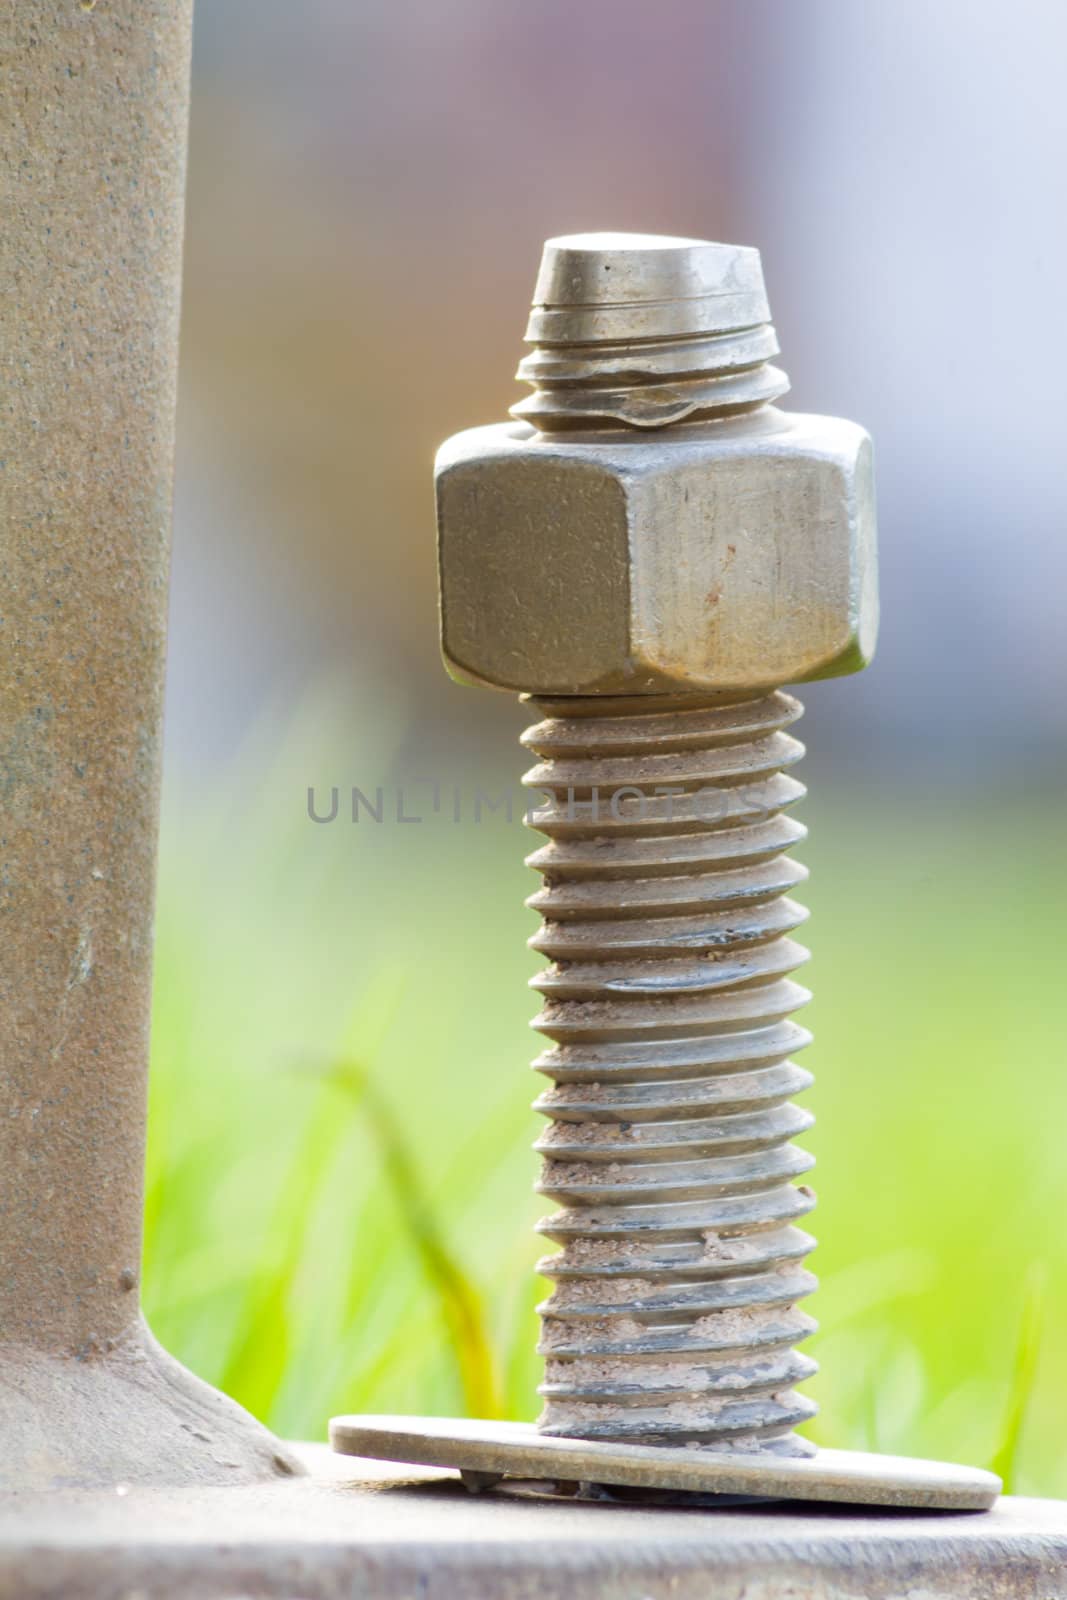 Worn Upright Lag Bolt, Nut, and Washer